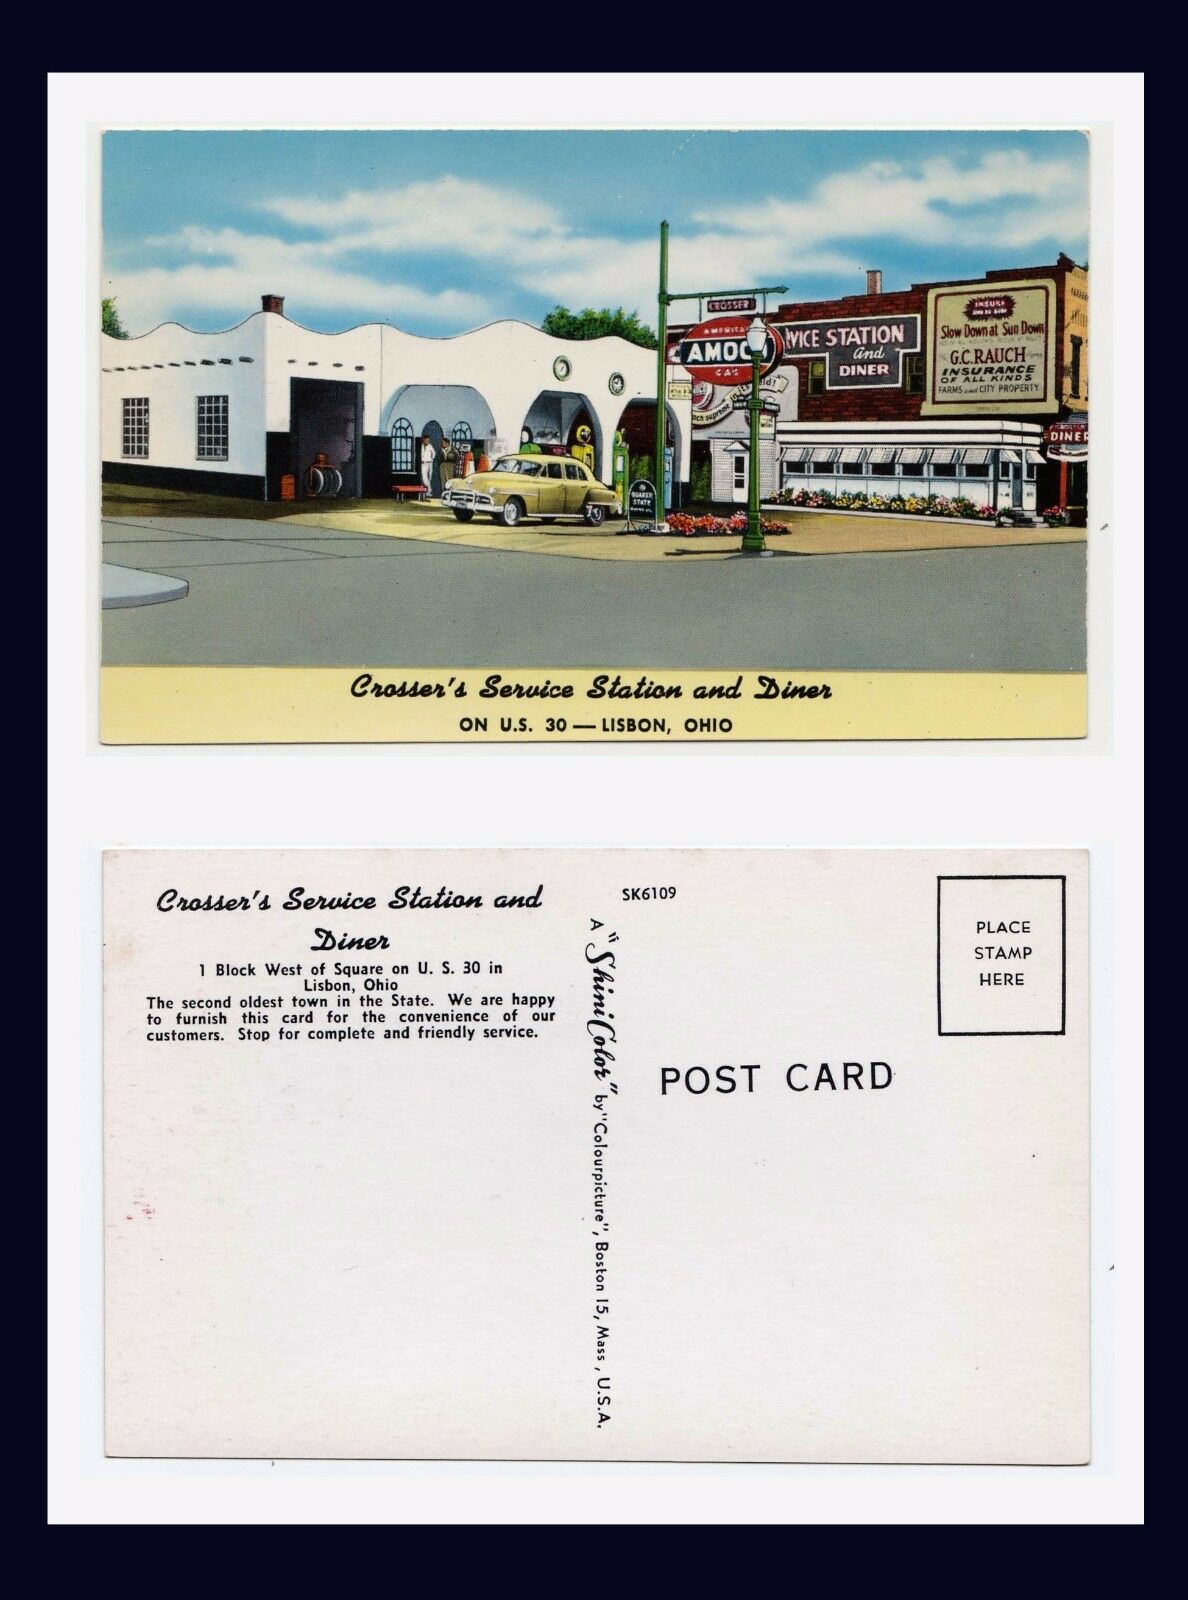 Ohio Lisbon Crosser's Service Station Diner Us Route 30 Lincoln Hwy Circa 1952